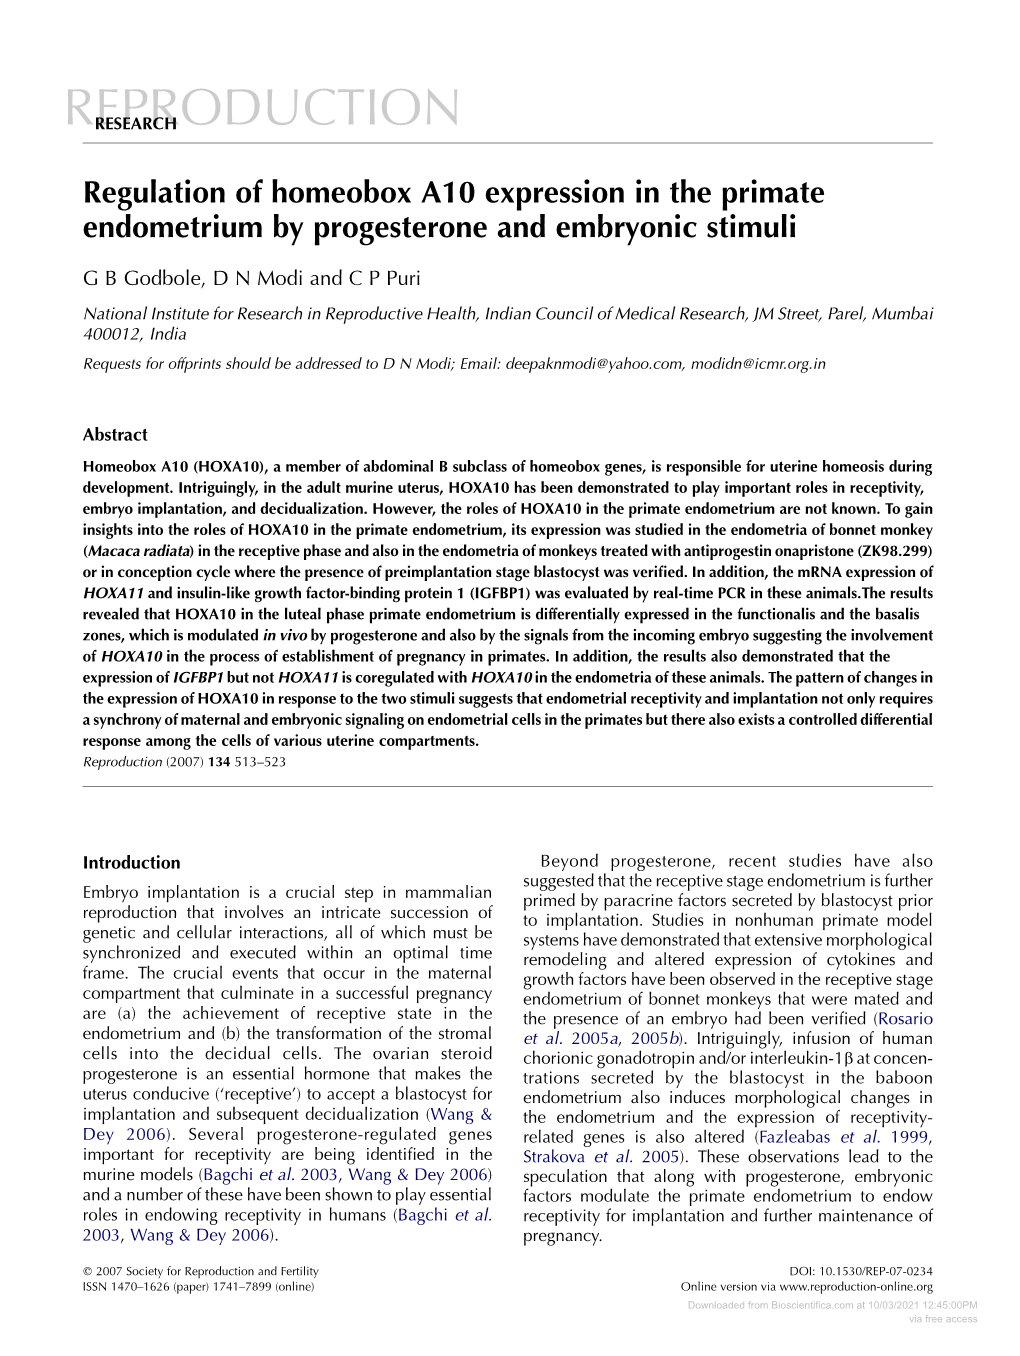 Regulation of Homeobox A10 Expression in the Primate Endometrium by Progesterone and Embryonic Stimuli